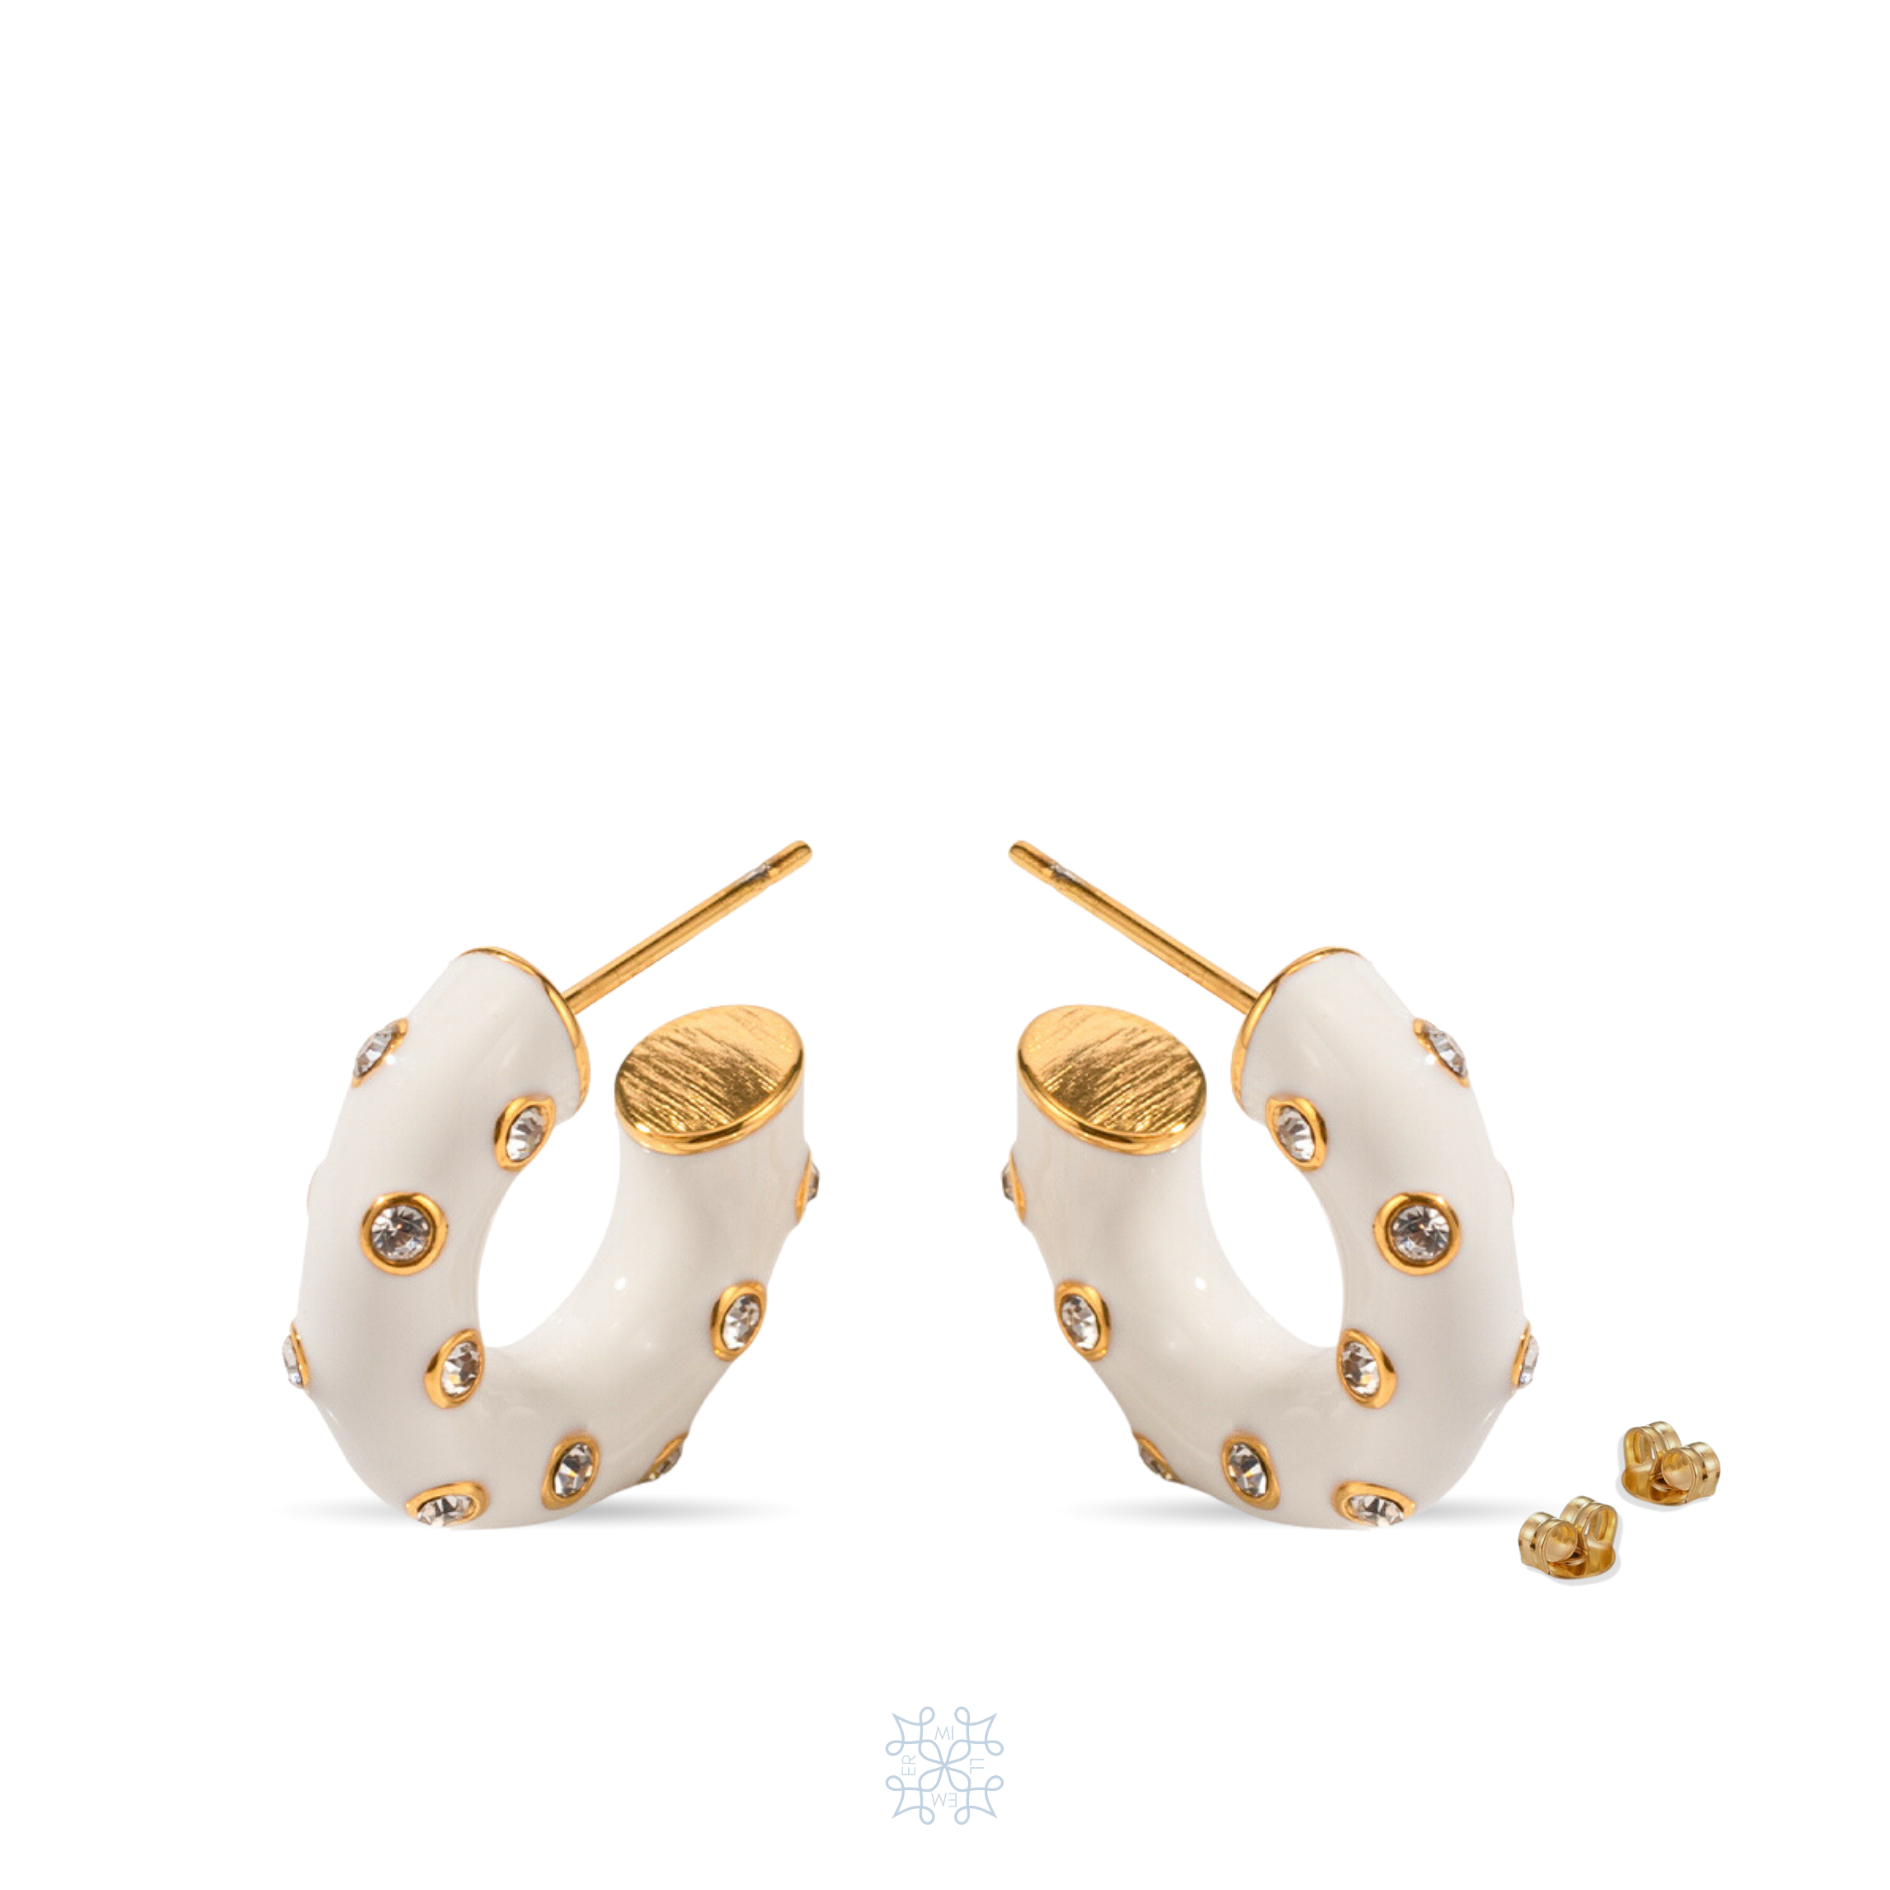 Gold Enamel Hoop Earrings painted with white enamel and adorned with zircons.